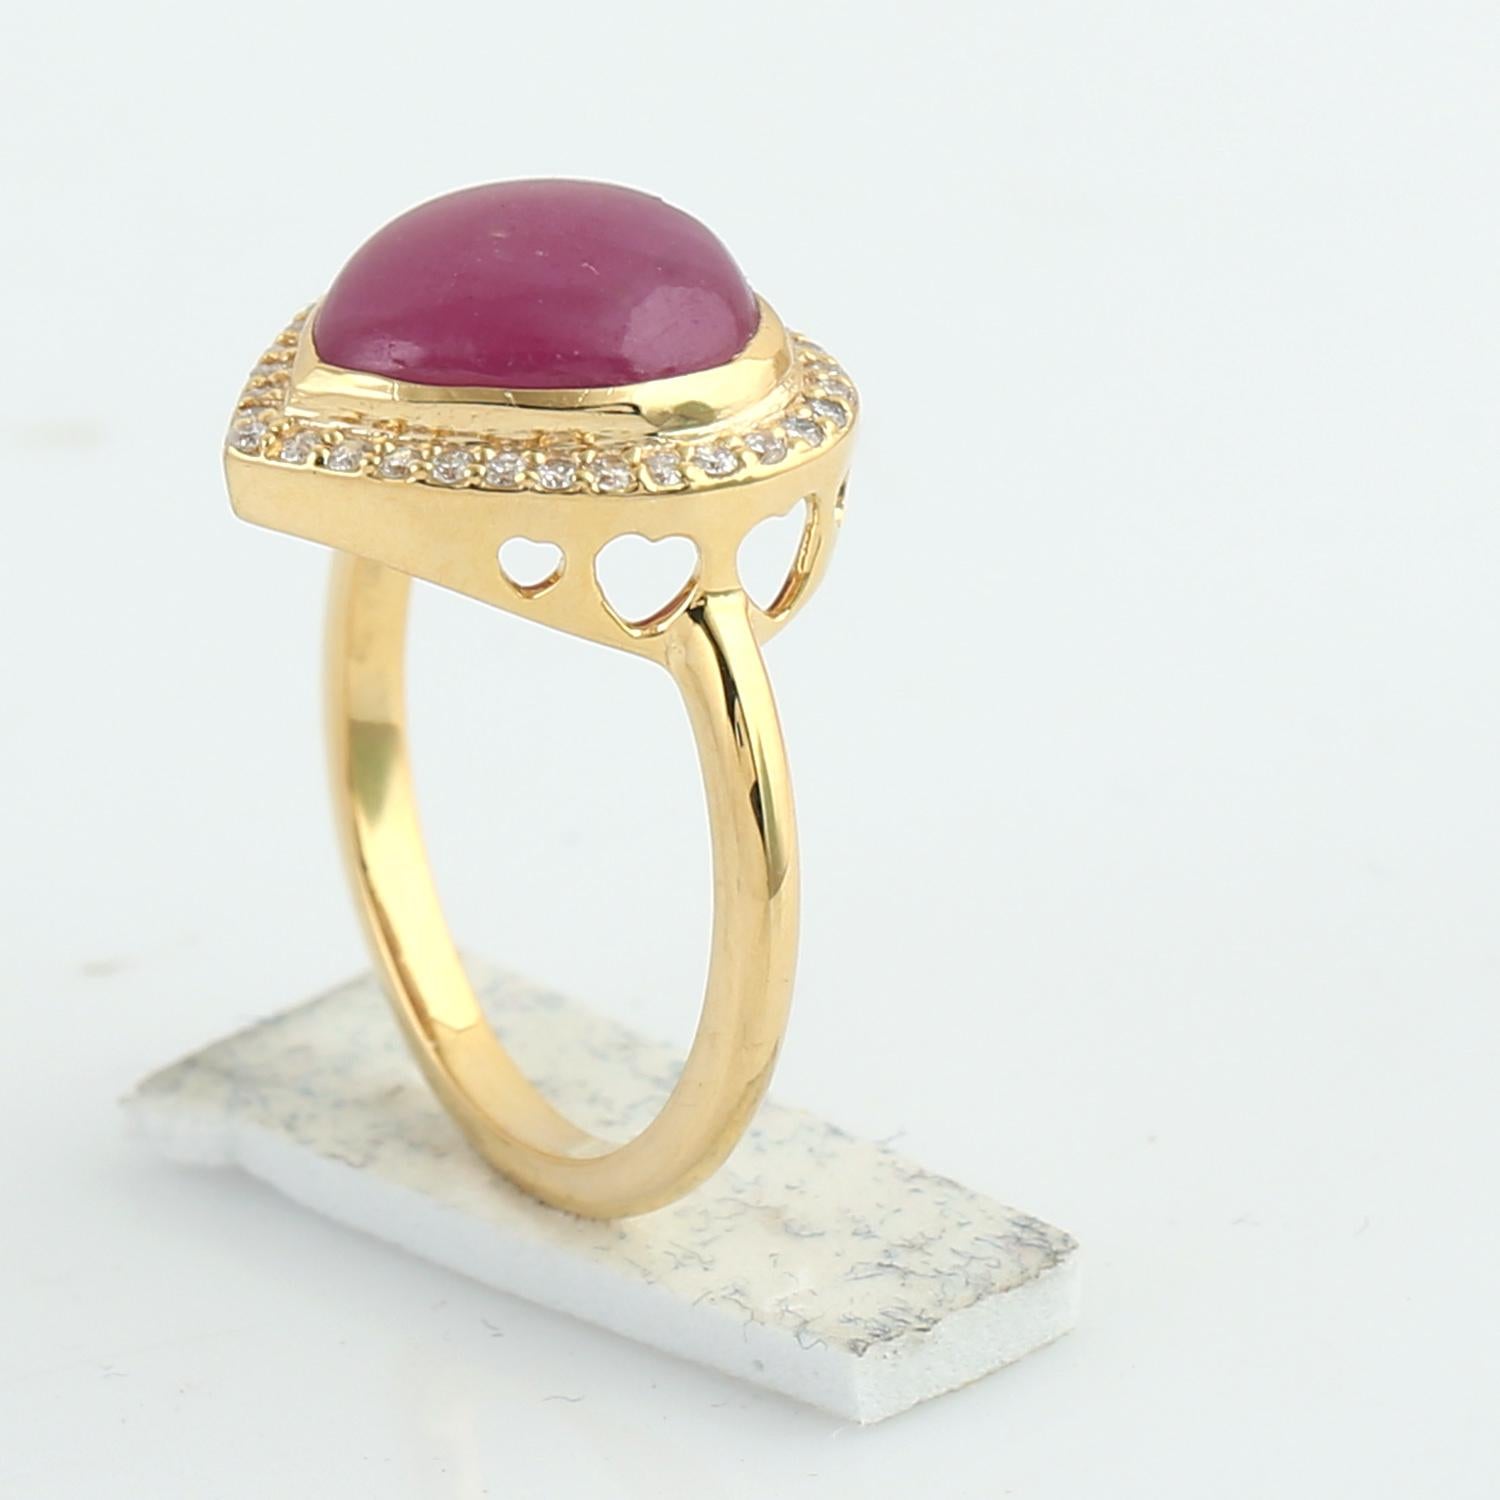 Artisan 6.41 Ct Heart Shaped Pink Sapphire Cocktail Ring With Diamonds In 18k Gold For Sale